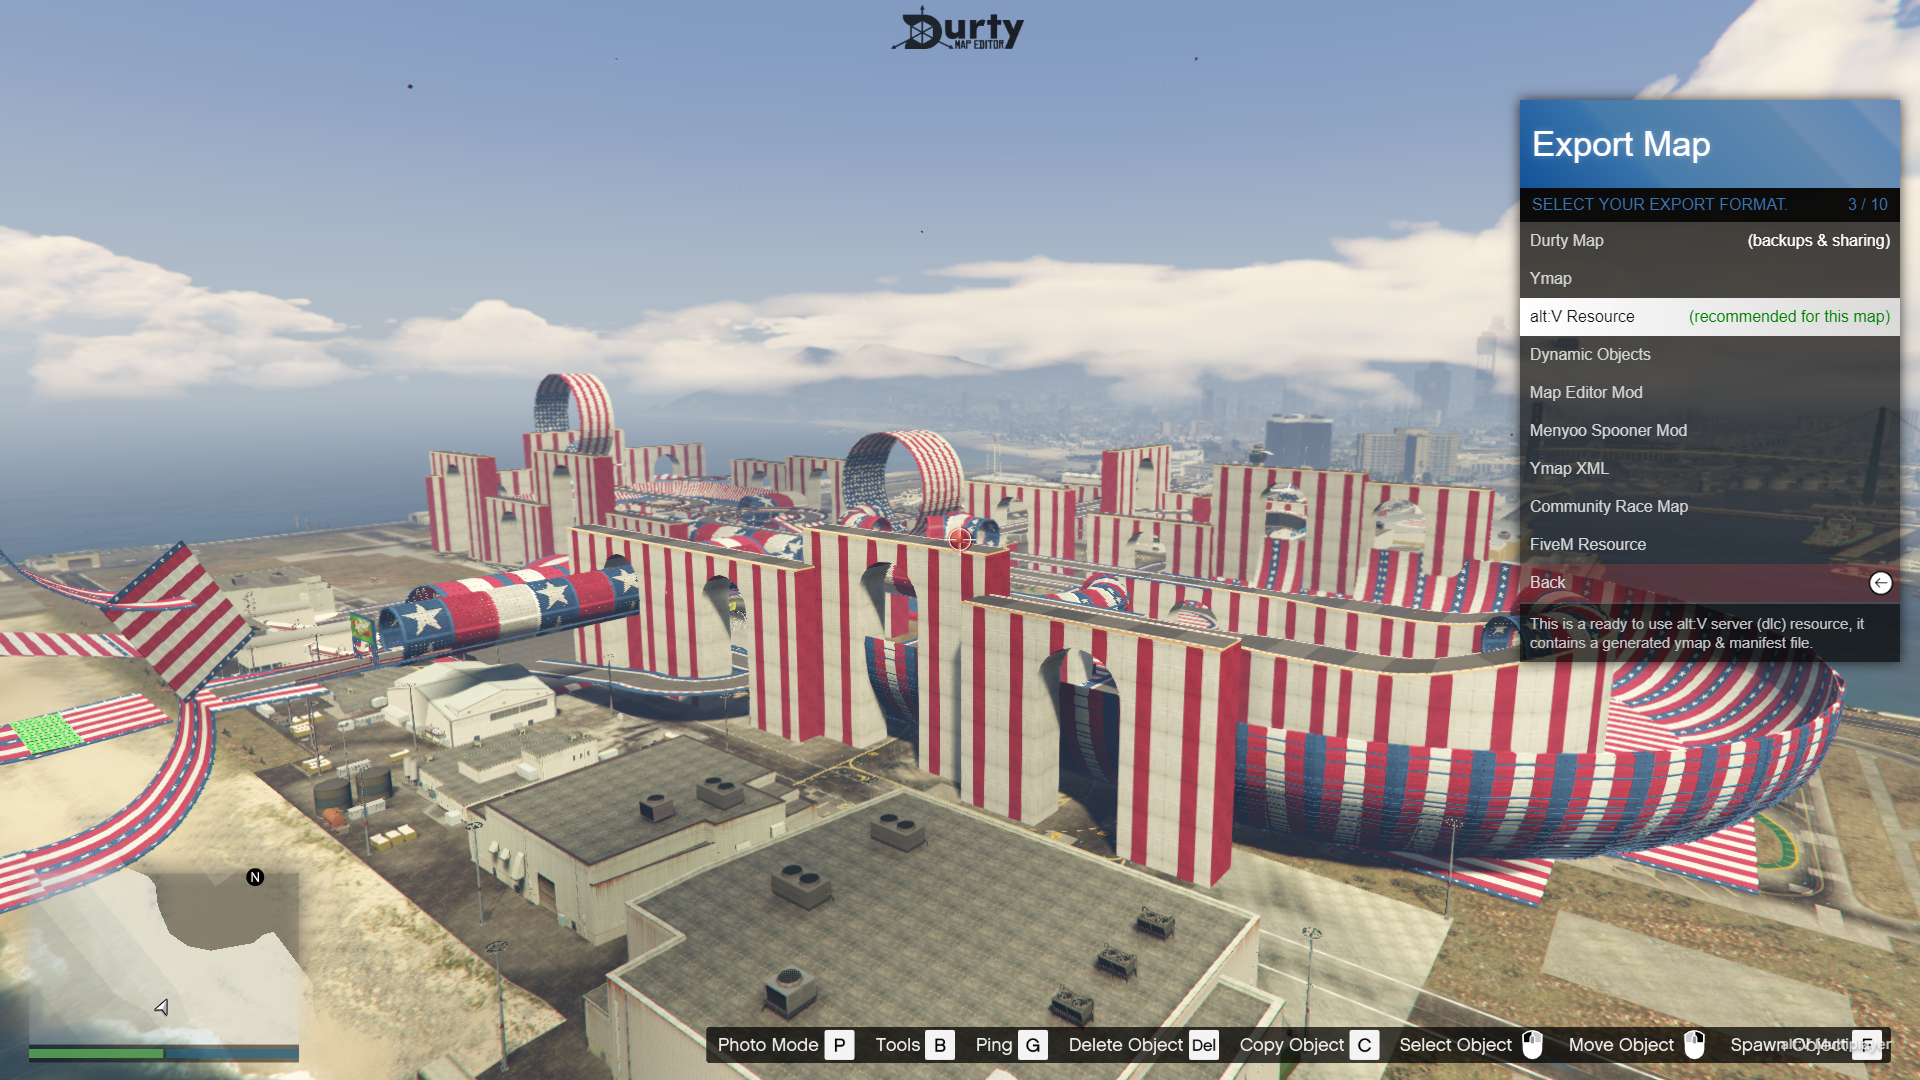 Top 5 FiveM map mods for GTA 5 in 2023